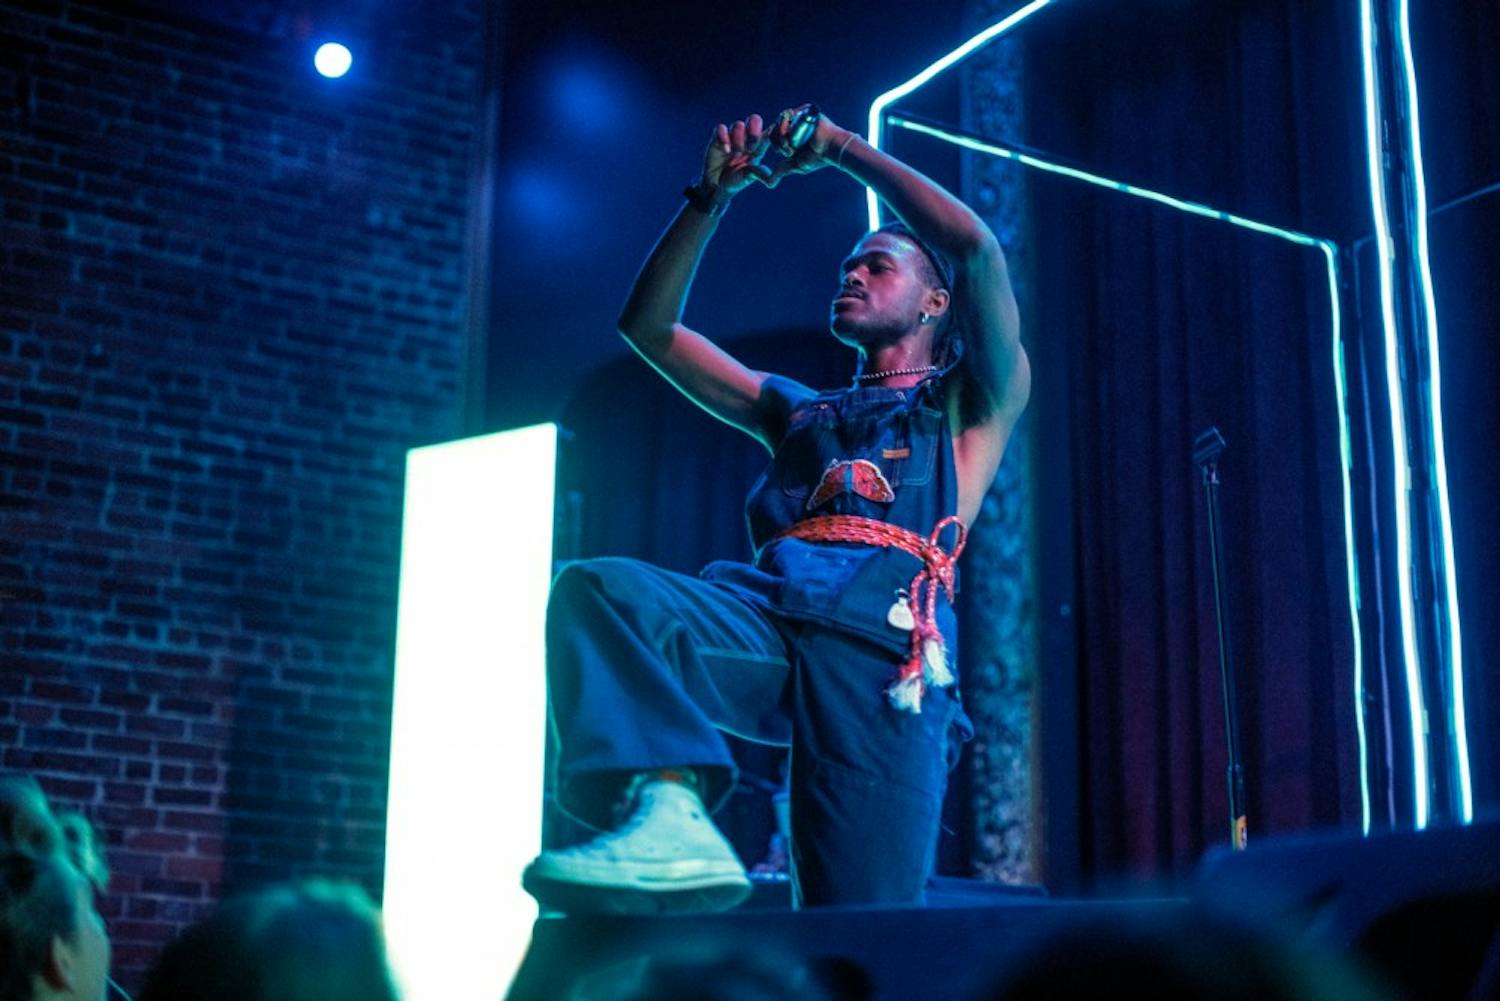 Los Angeles rapper Duckwrth said he “inevitably” gets his crowds moving. Duckwrth, who is currently on tour, talked with The Spectrum about his musical idols and the current state of hip-hop.